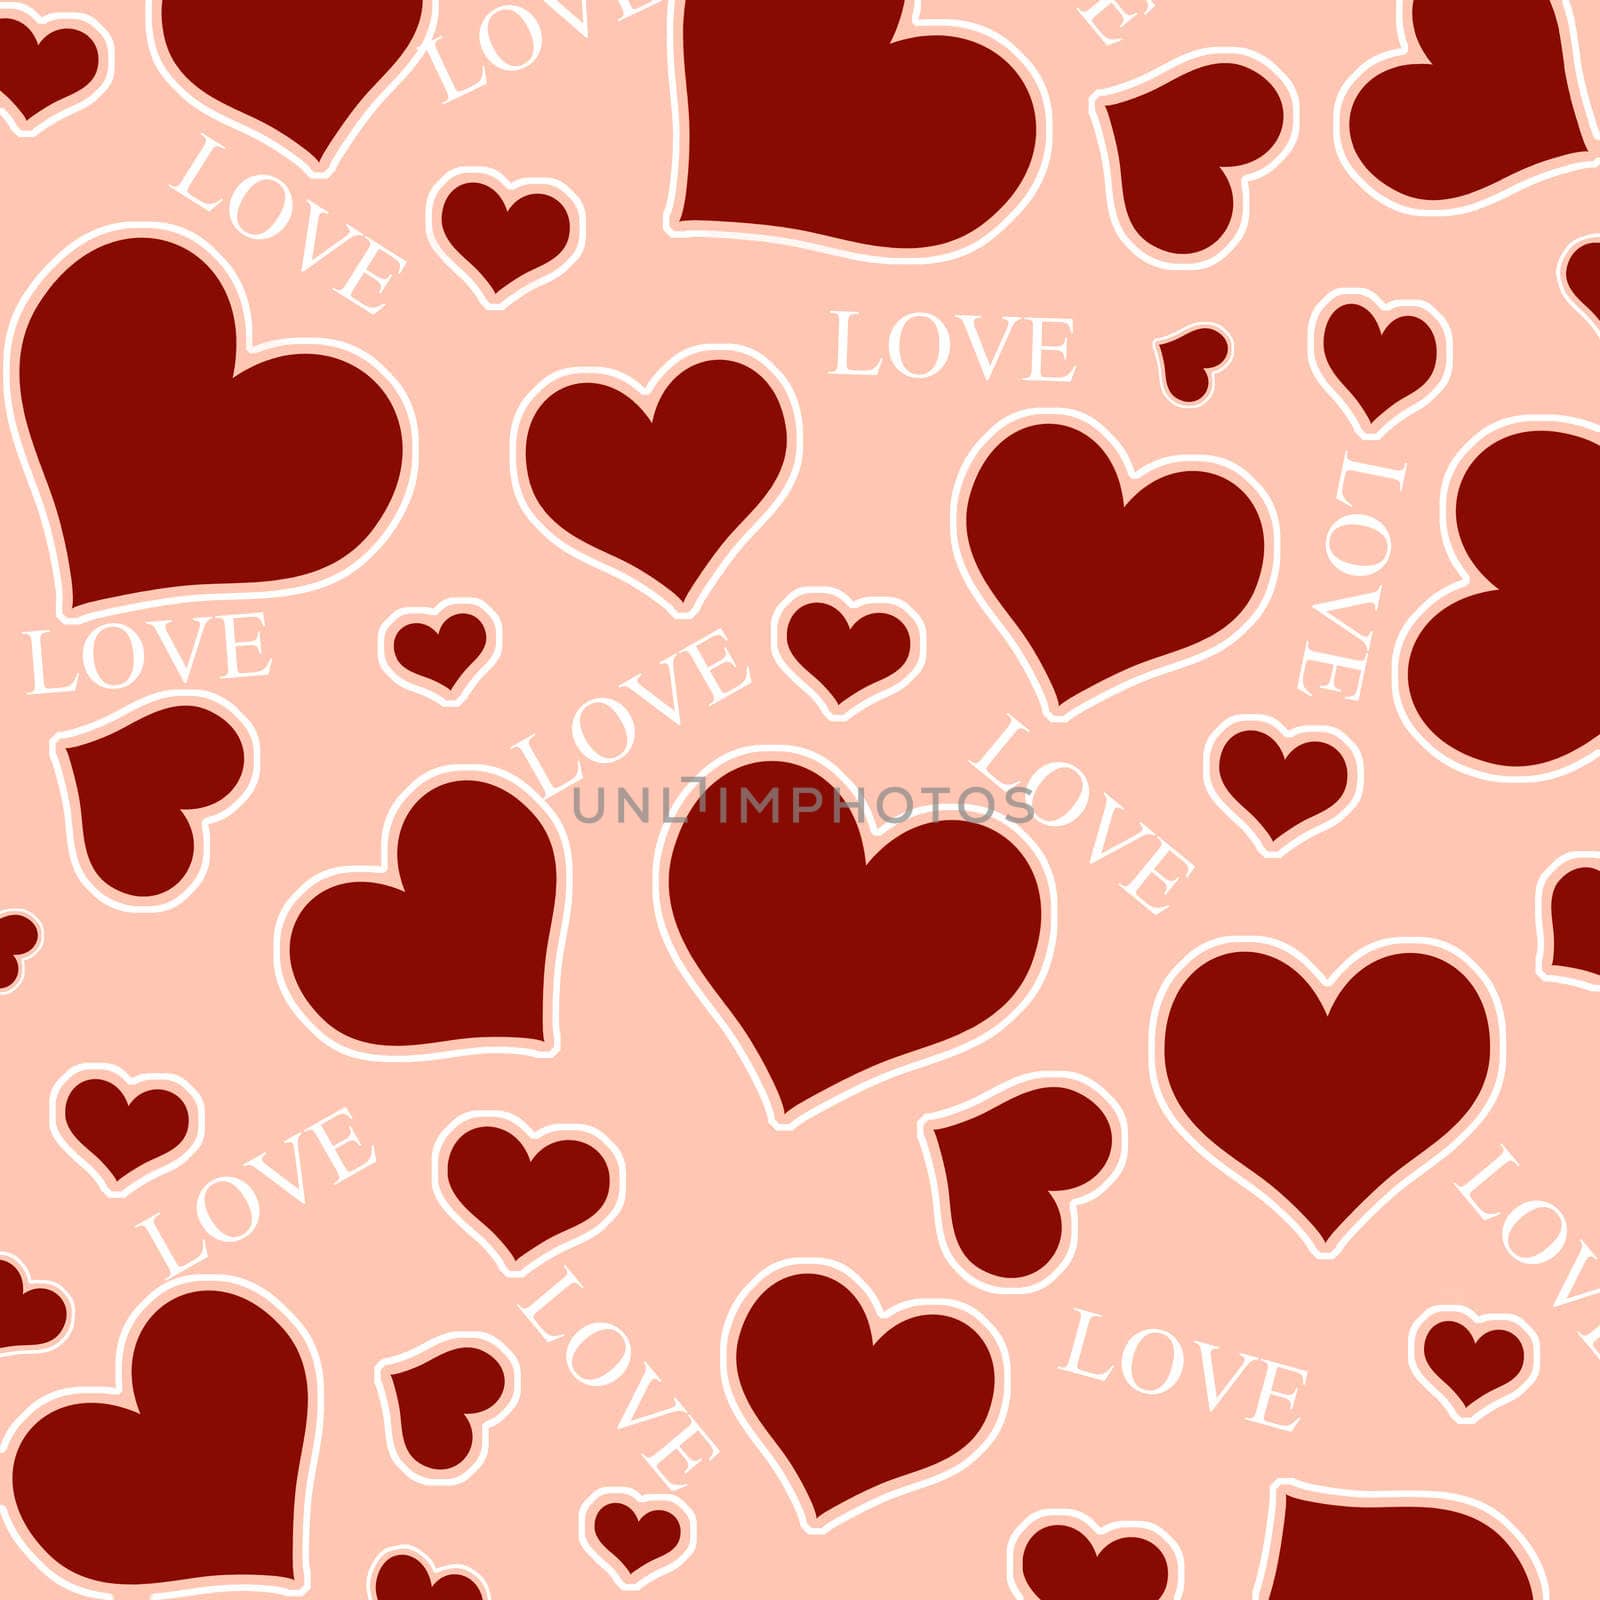 Red hearts and LOVE wording. by Gamjai